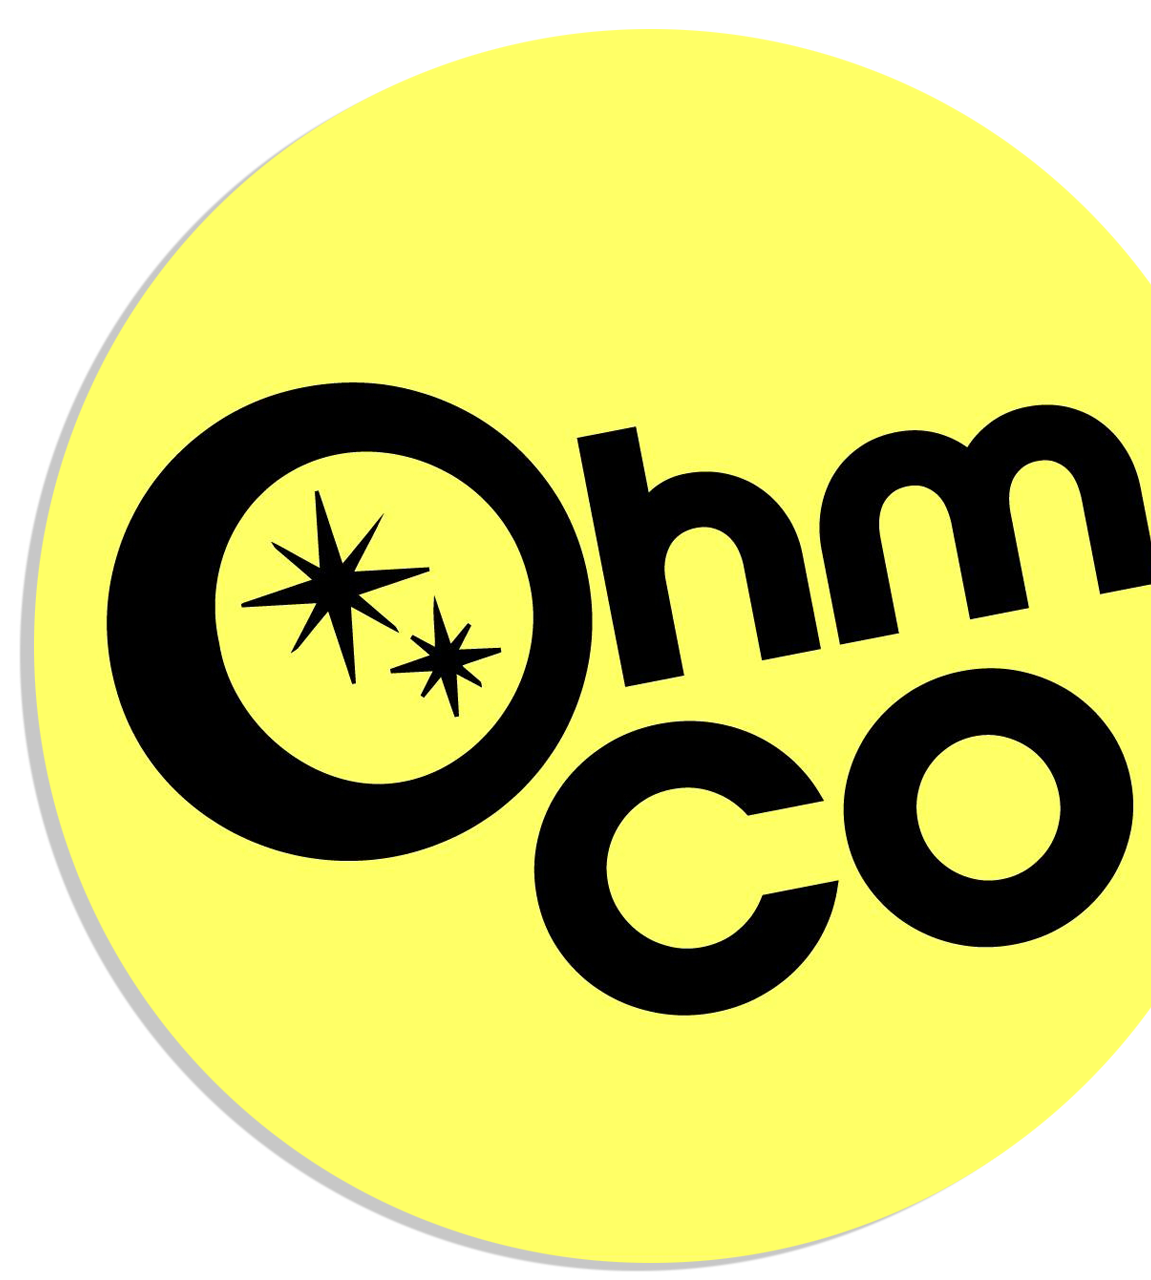 OhmCo previously Rule of Design carwash website and marketing agencythe best carwash marketing websites and social media